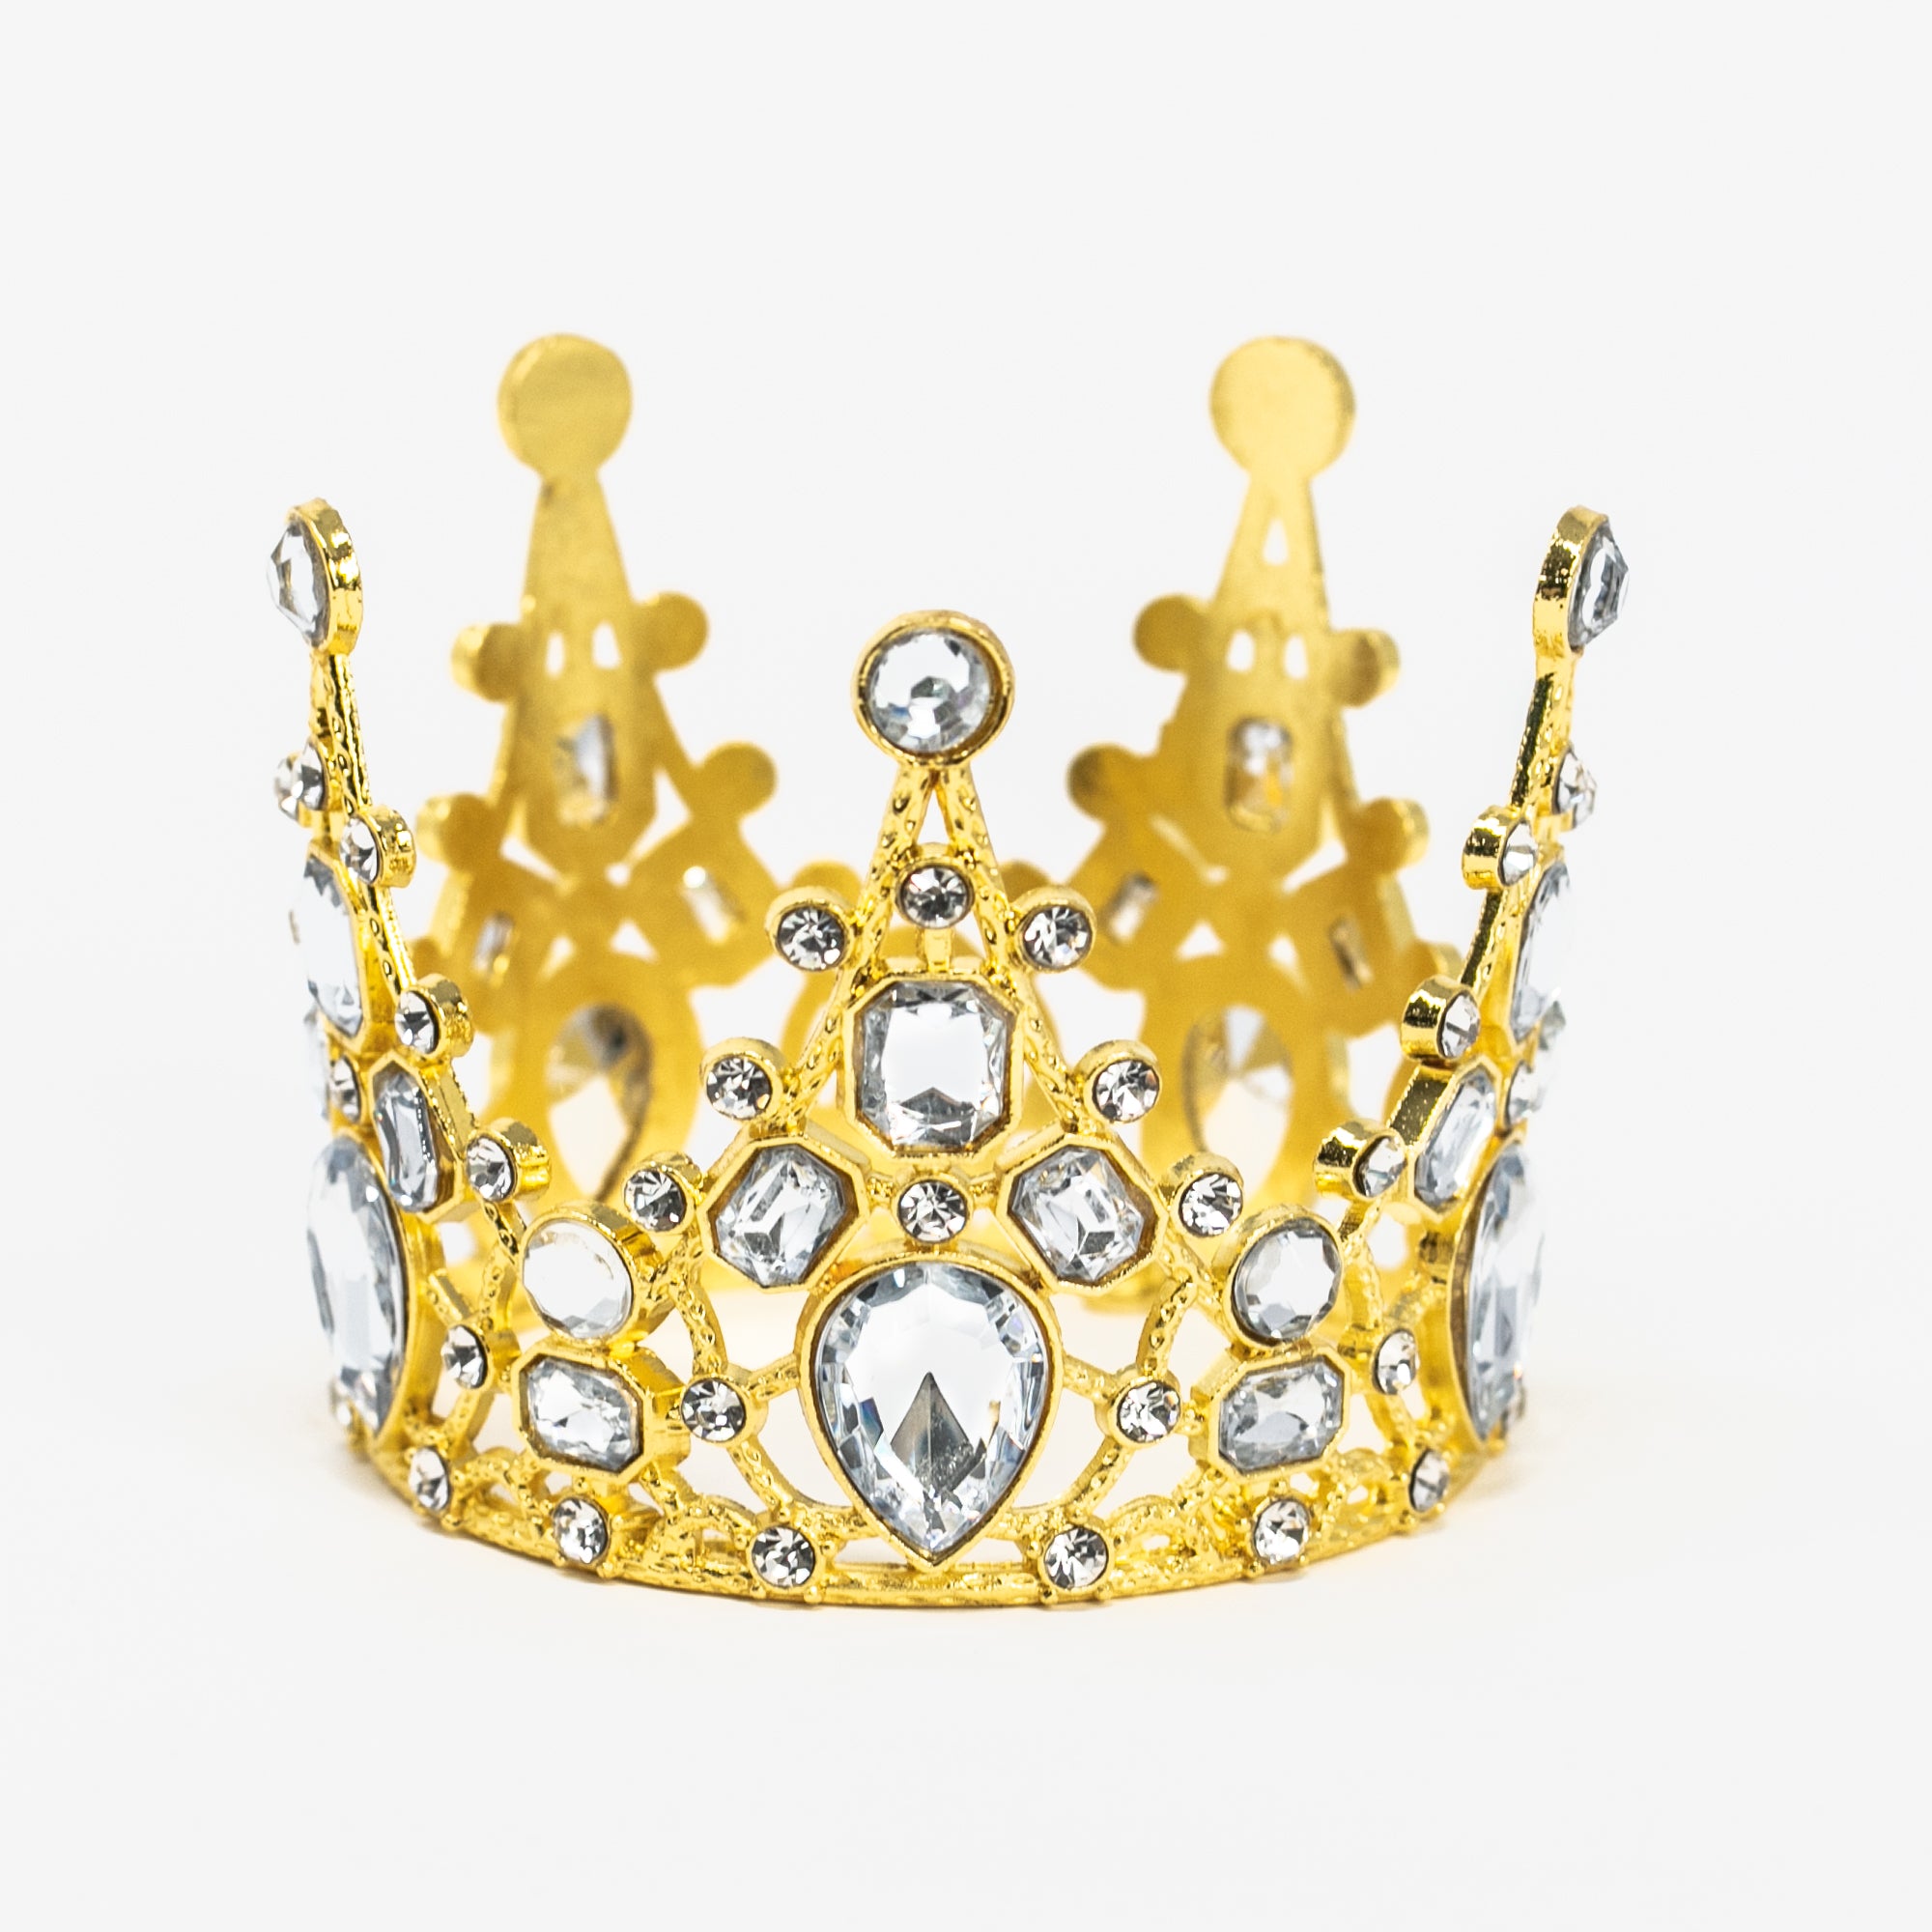 Mini Crowns 6/Pkg, Gold by Creative Converting - Pack of 6 – JK Trading  Company Inc.